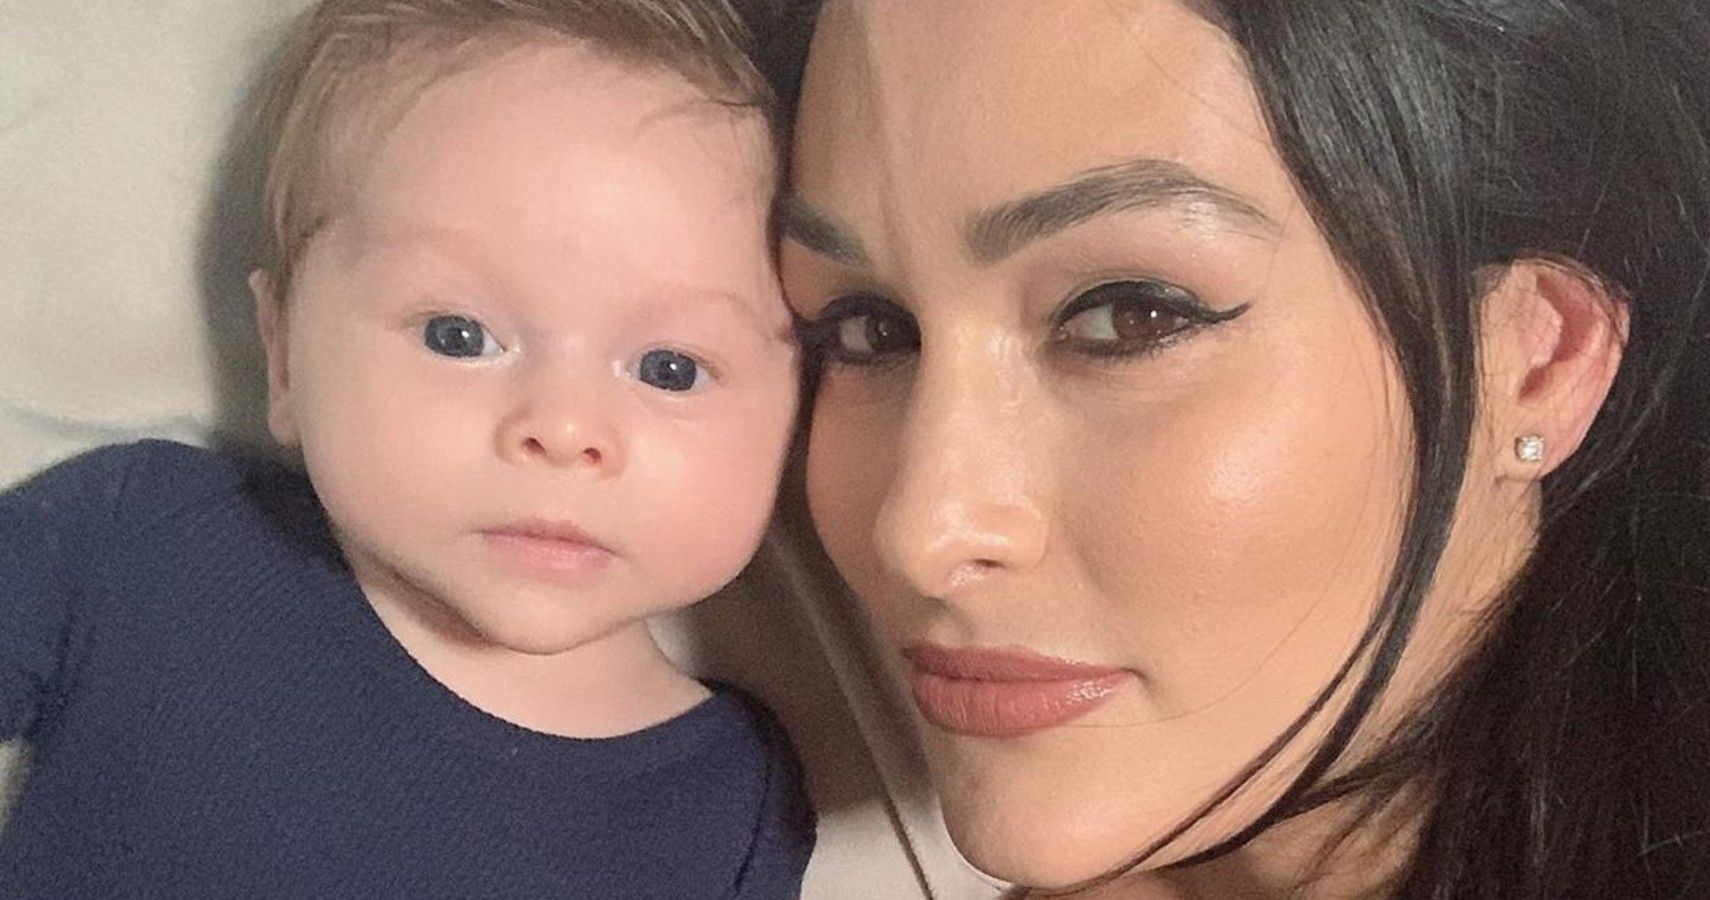 Artem Chigvintsev Says His Baby Boy With Nikki Bella Is Naturally 'Athletic'